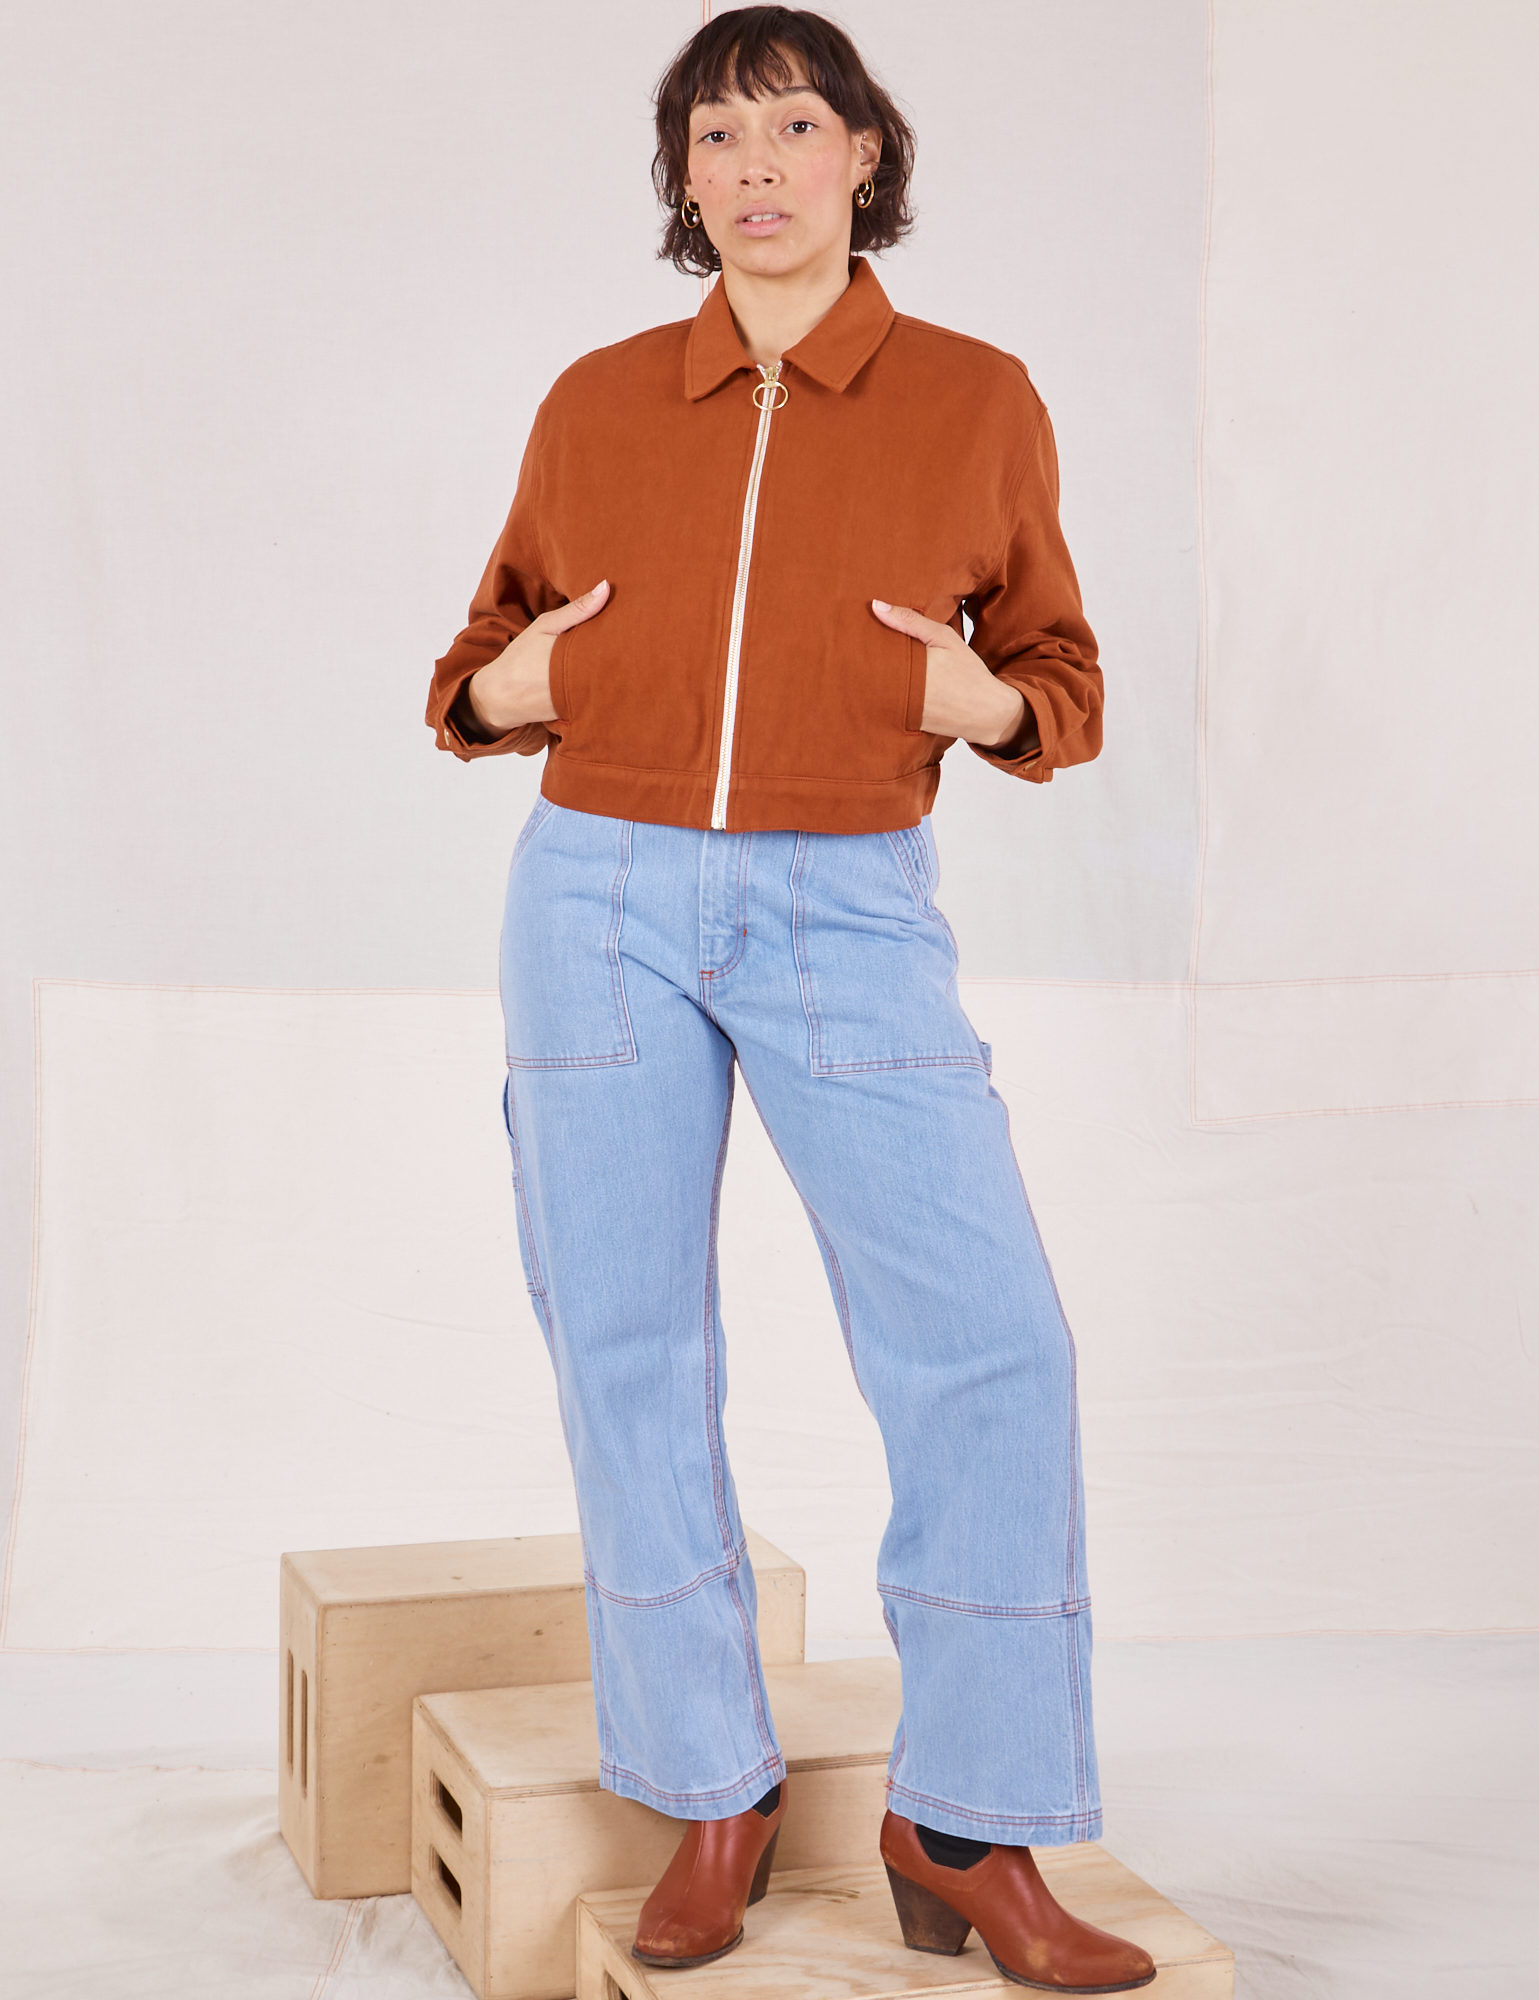 Tiara is wearing a zipped up Ricky Jacket in Burnt Terracotta and light wash Carpenter Jeans